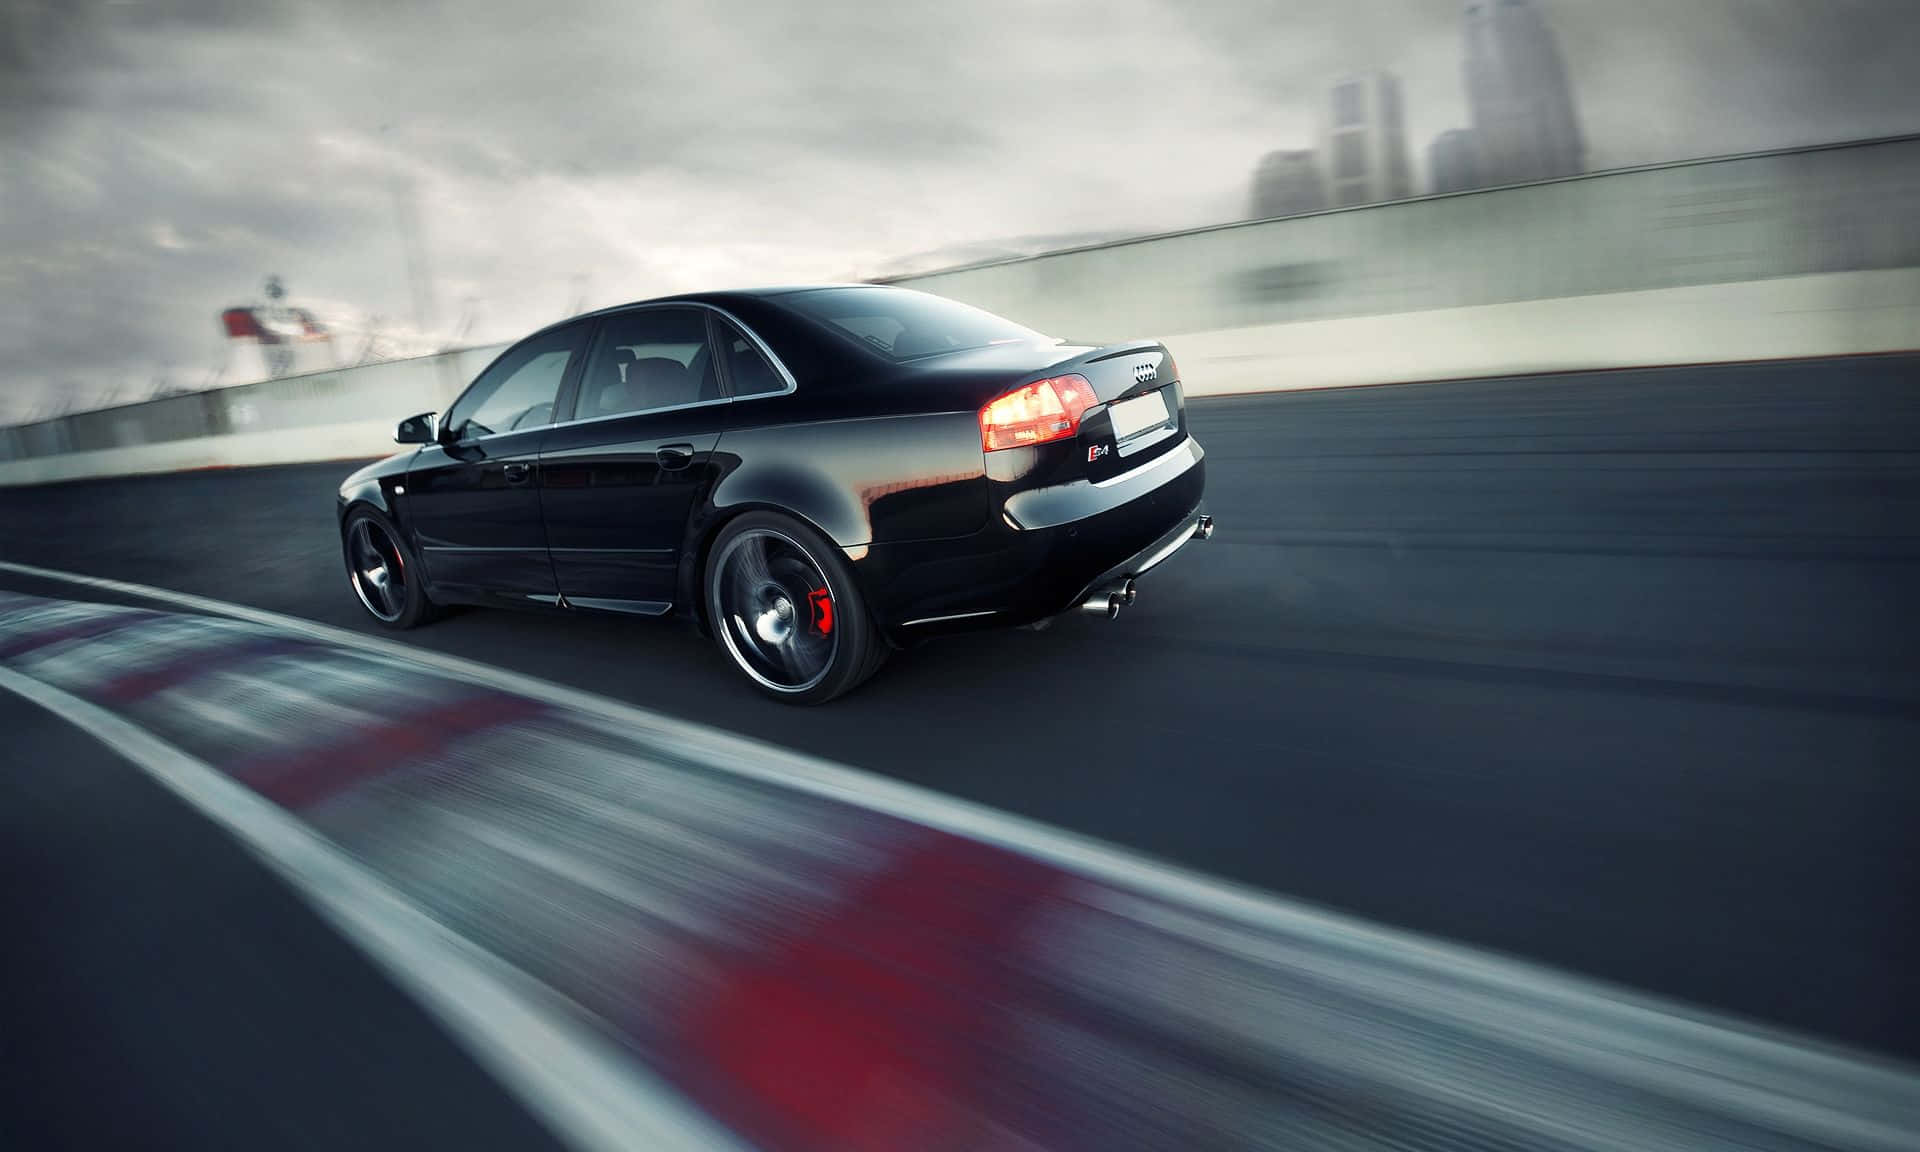 Dynamic and Powerful Audi S4 in Action Wallpaper